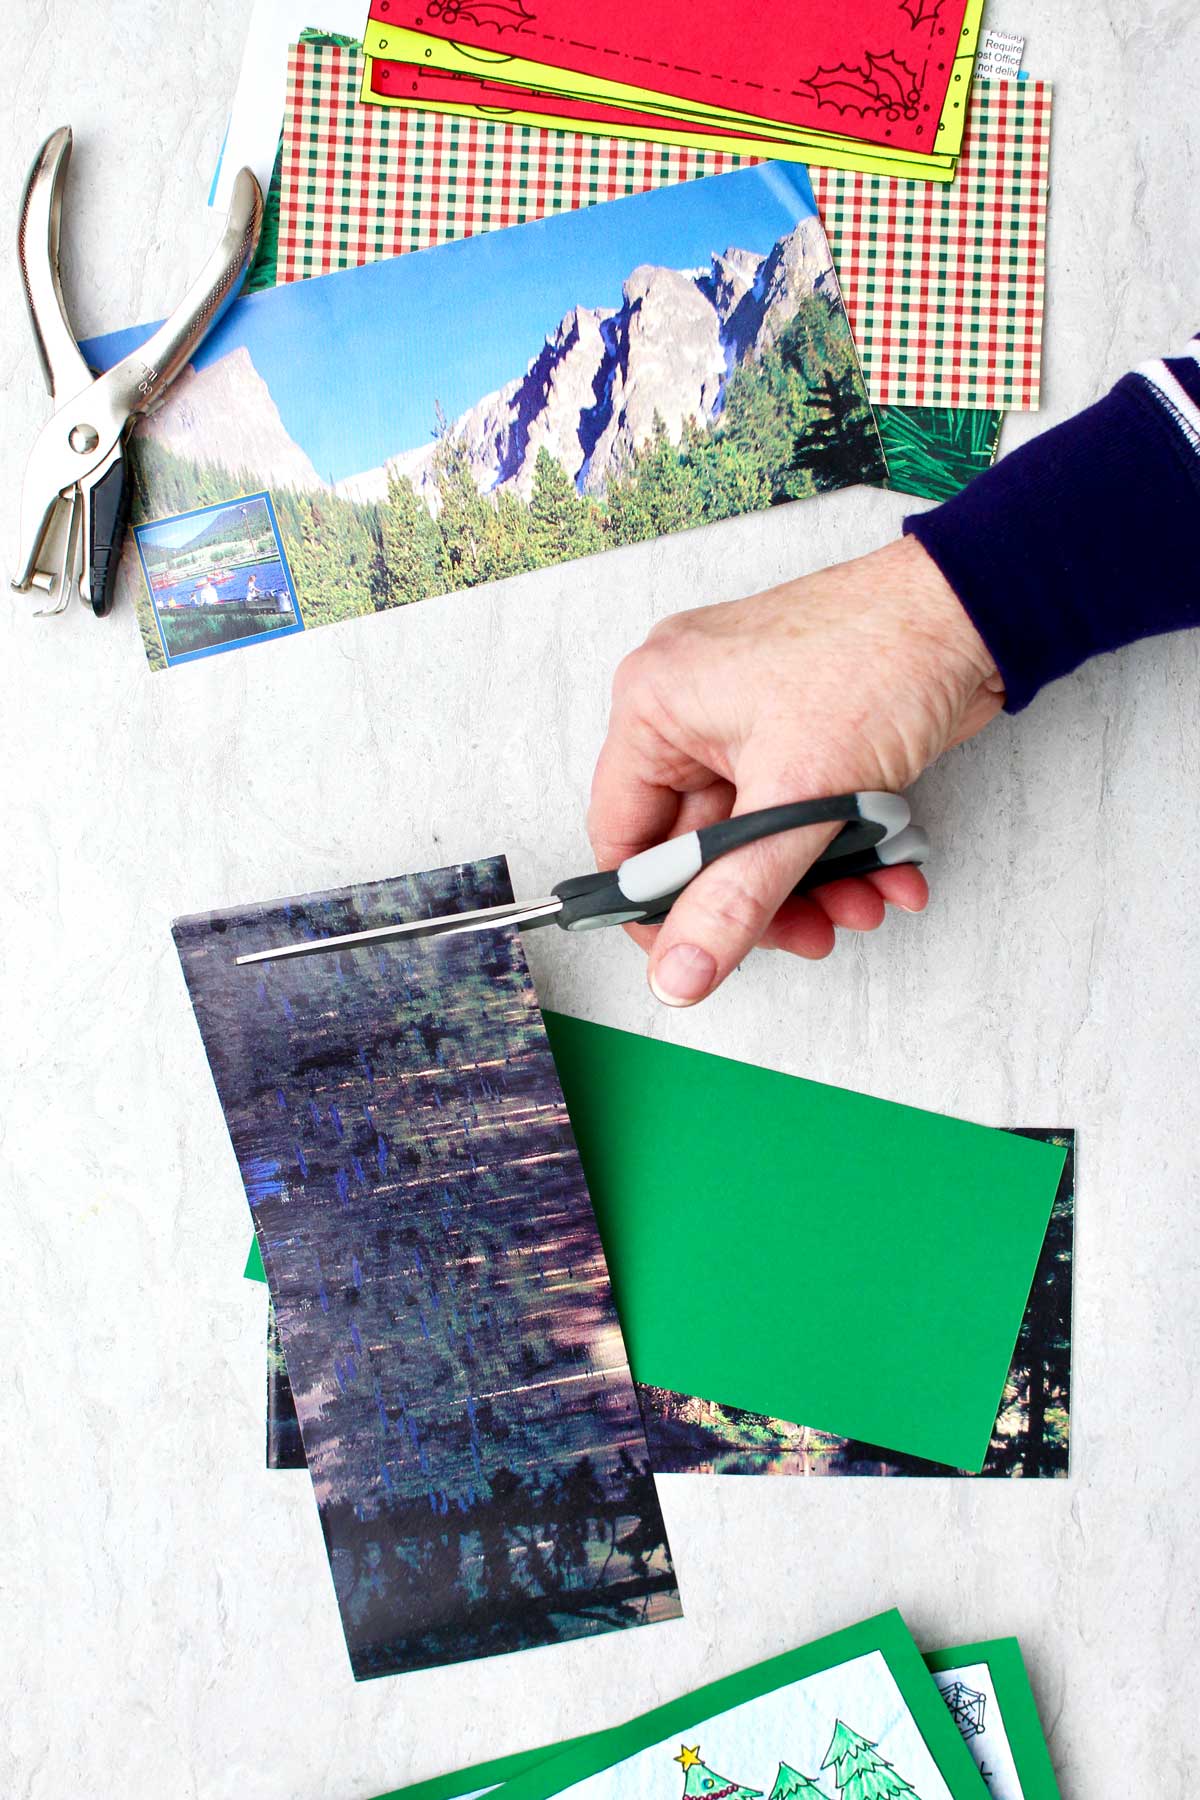 Someone cutting a magazine page into a rectangle, with colorful paper and other magazine page cutouts nearby.